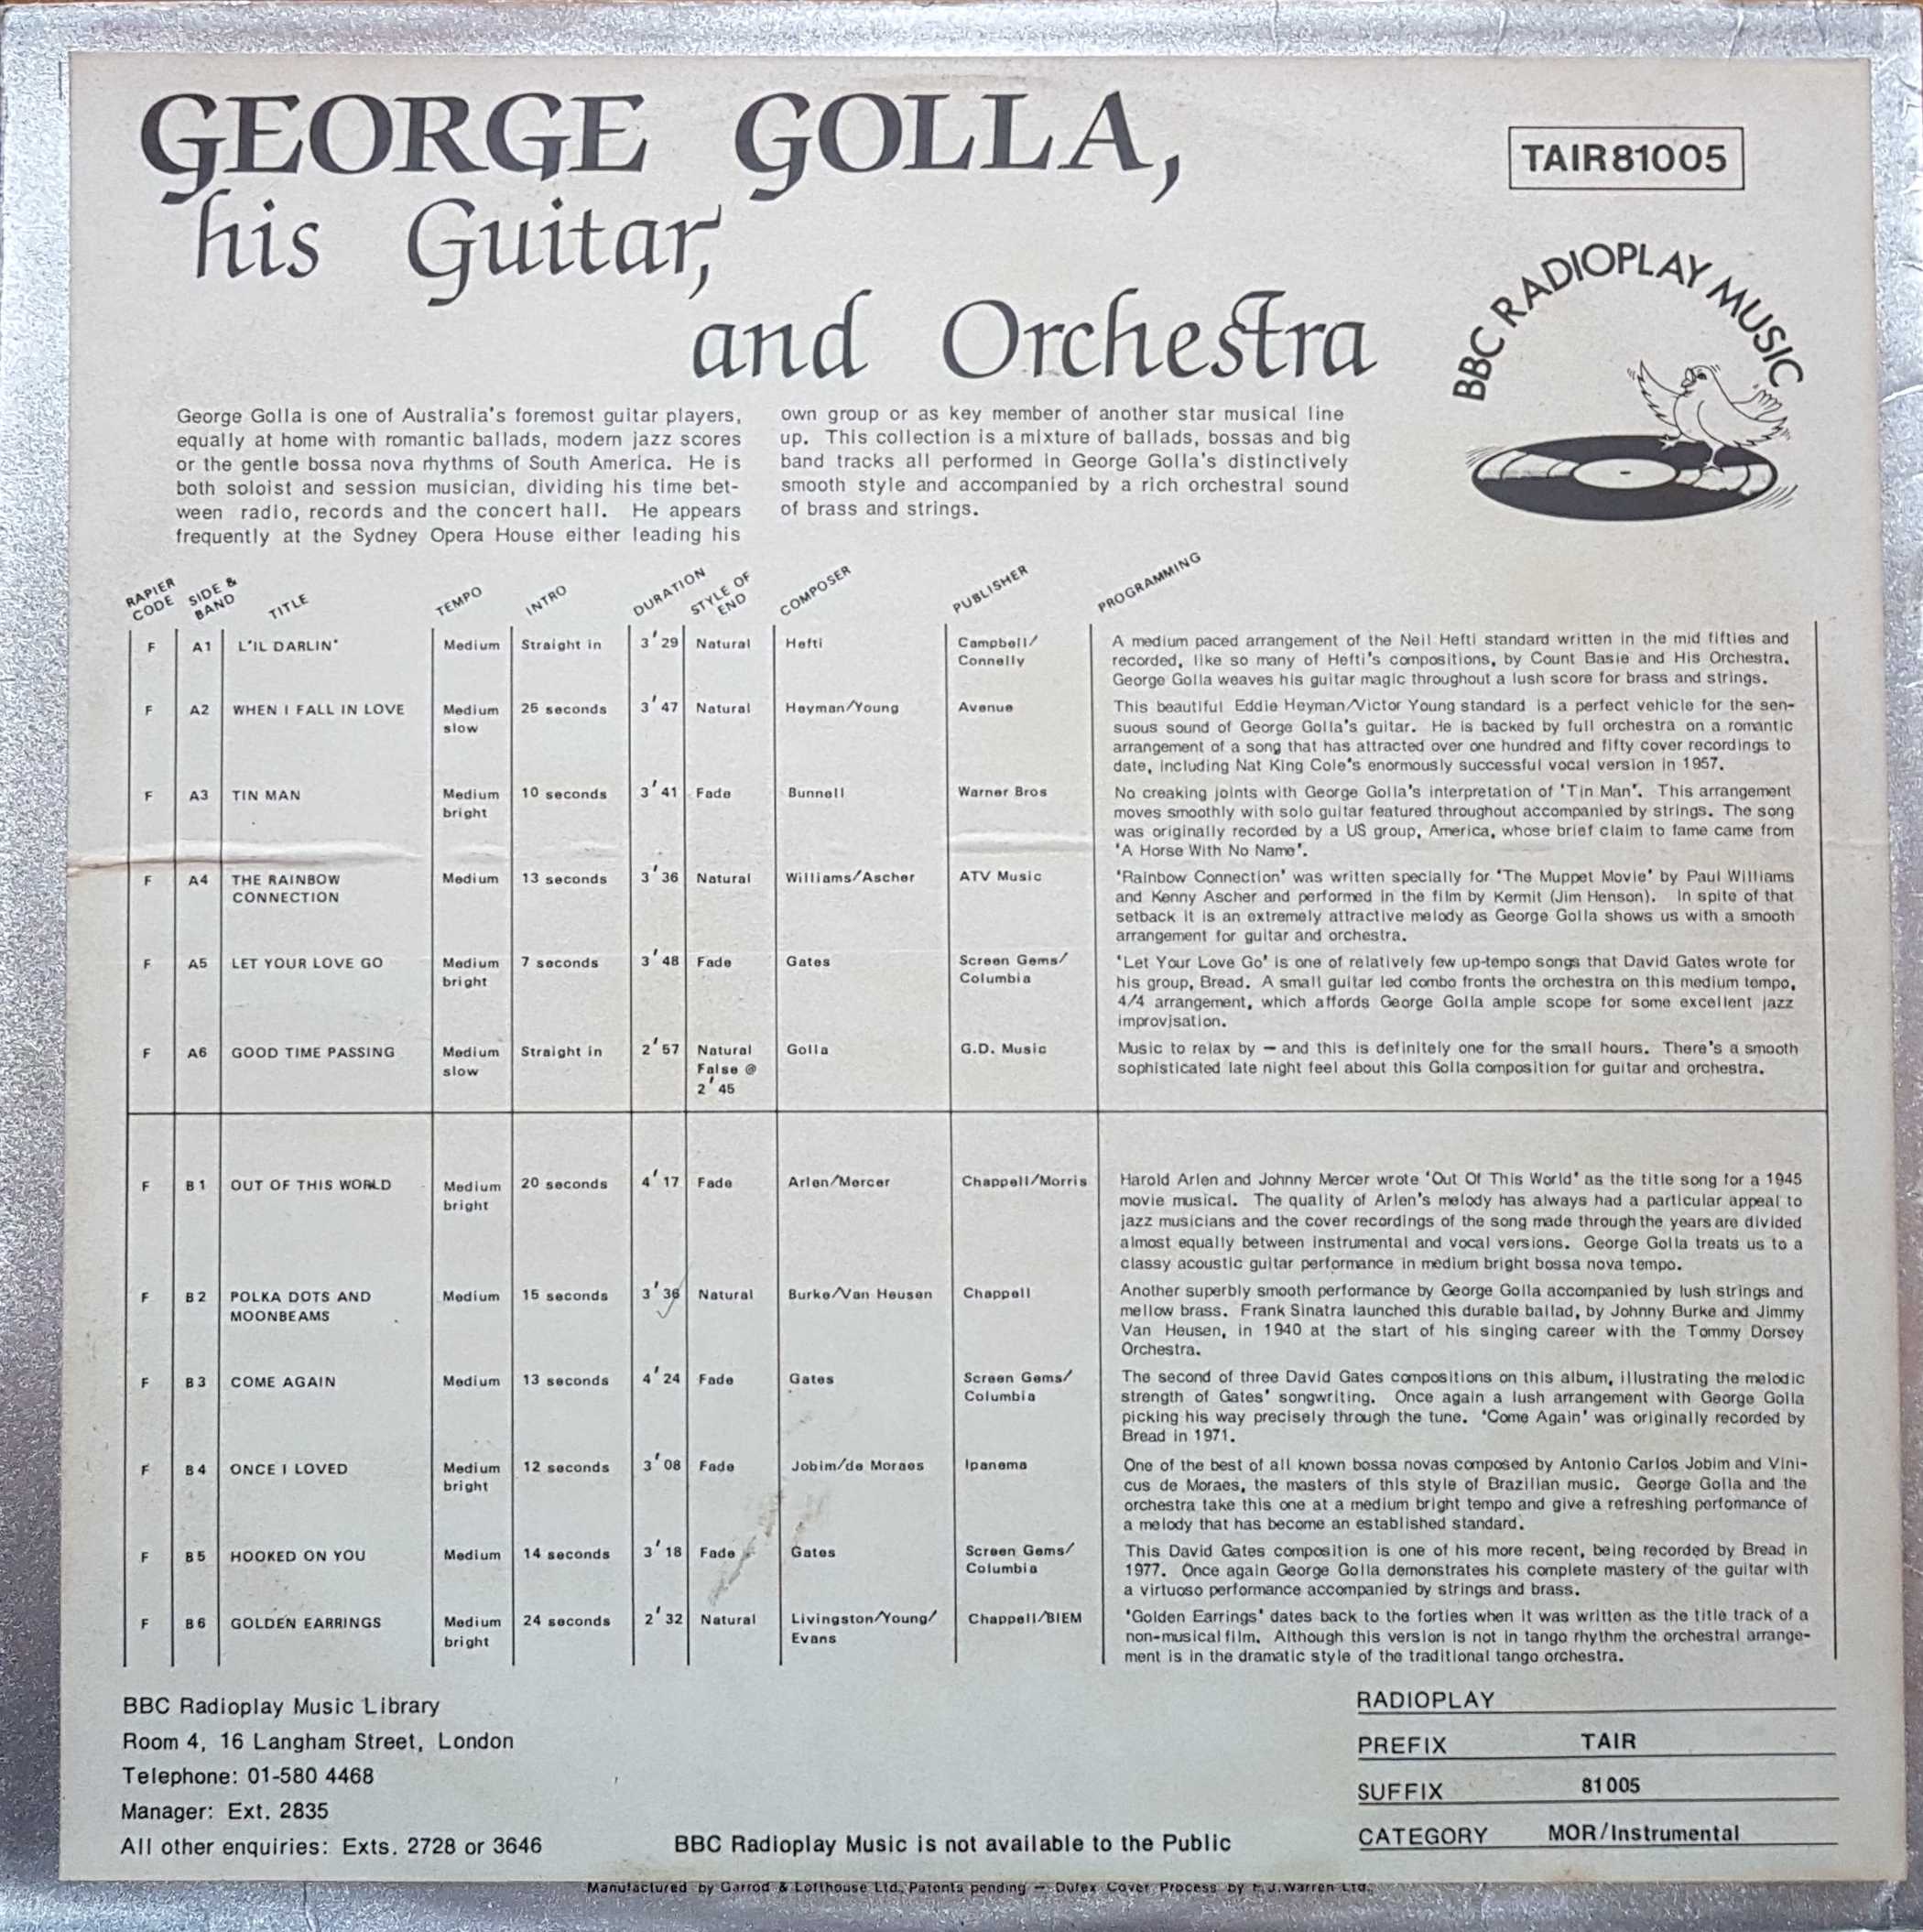 Picture of TAIR 81005 George Golla, his guitar, and Orchestra by artist Various from the BBC records and Tapes library